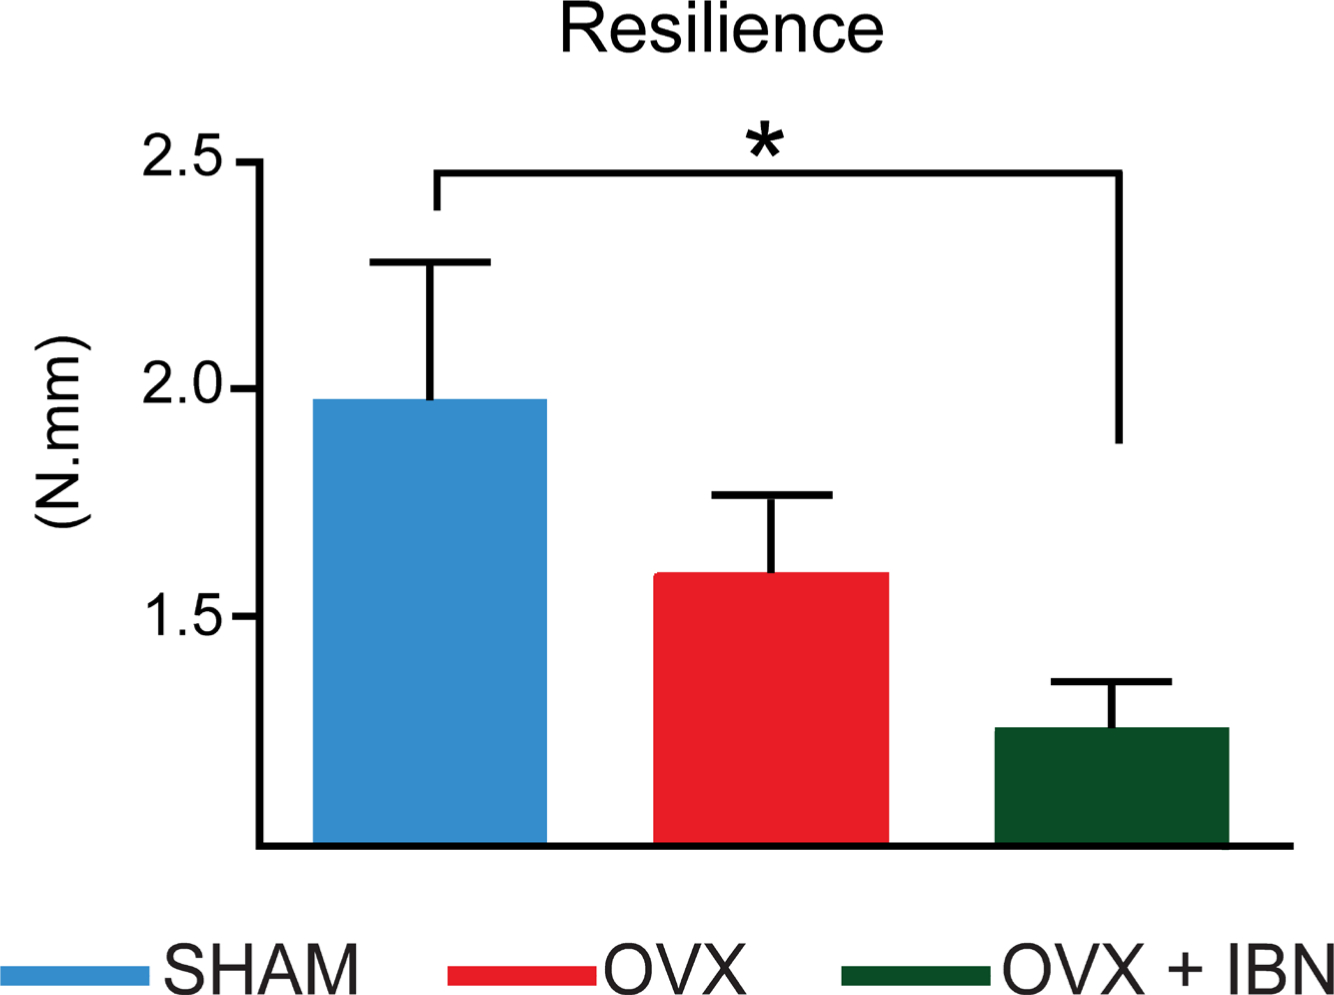 Fig. 3 
            Effect of ibandronate/ovariectomy treatment on biomechanical properties. Measurement (mean ± SE) of resilience (N.mm) in mouse femoral neck fracture model in sham-operated mice (SHAM), ovariectomized (OVX) mice receiving subcutaneous saline solution and ovariectomized mice treated weekly, from 20 weeks, for 24 weeks with subcutaneous ibandronate (Bonviva®, 1 mg/ml, Roche, 100 μm/kg; OVX+IBN). Group size was seven per group. Resilience failed to normality tests (p < 0.05) and was analyzed by Kruskal-Wallis test followed by a Dunn’s test. *Statistical significance (p < 0.05).
          